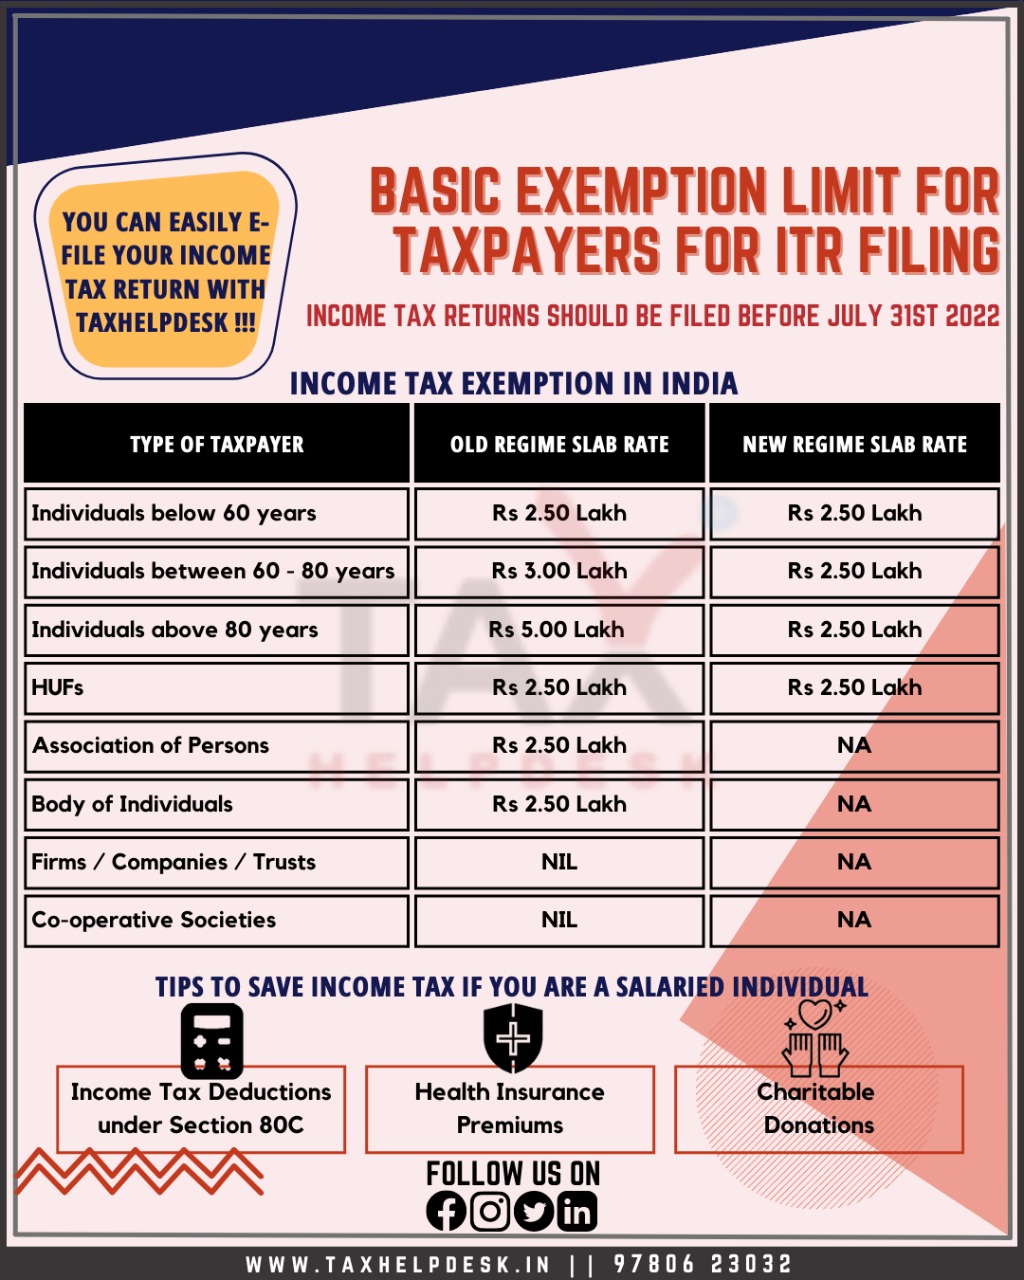 know-about-the-basic-itr-filing-exemption-limit-for-taxpayers